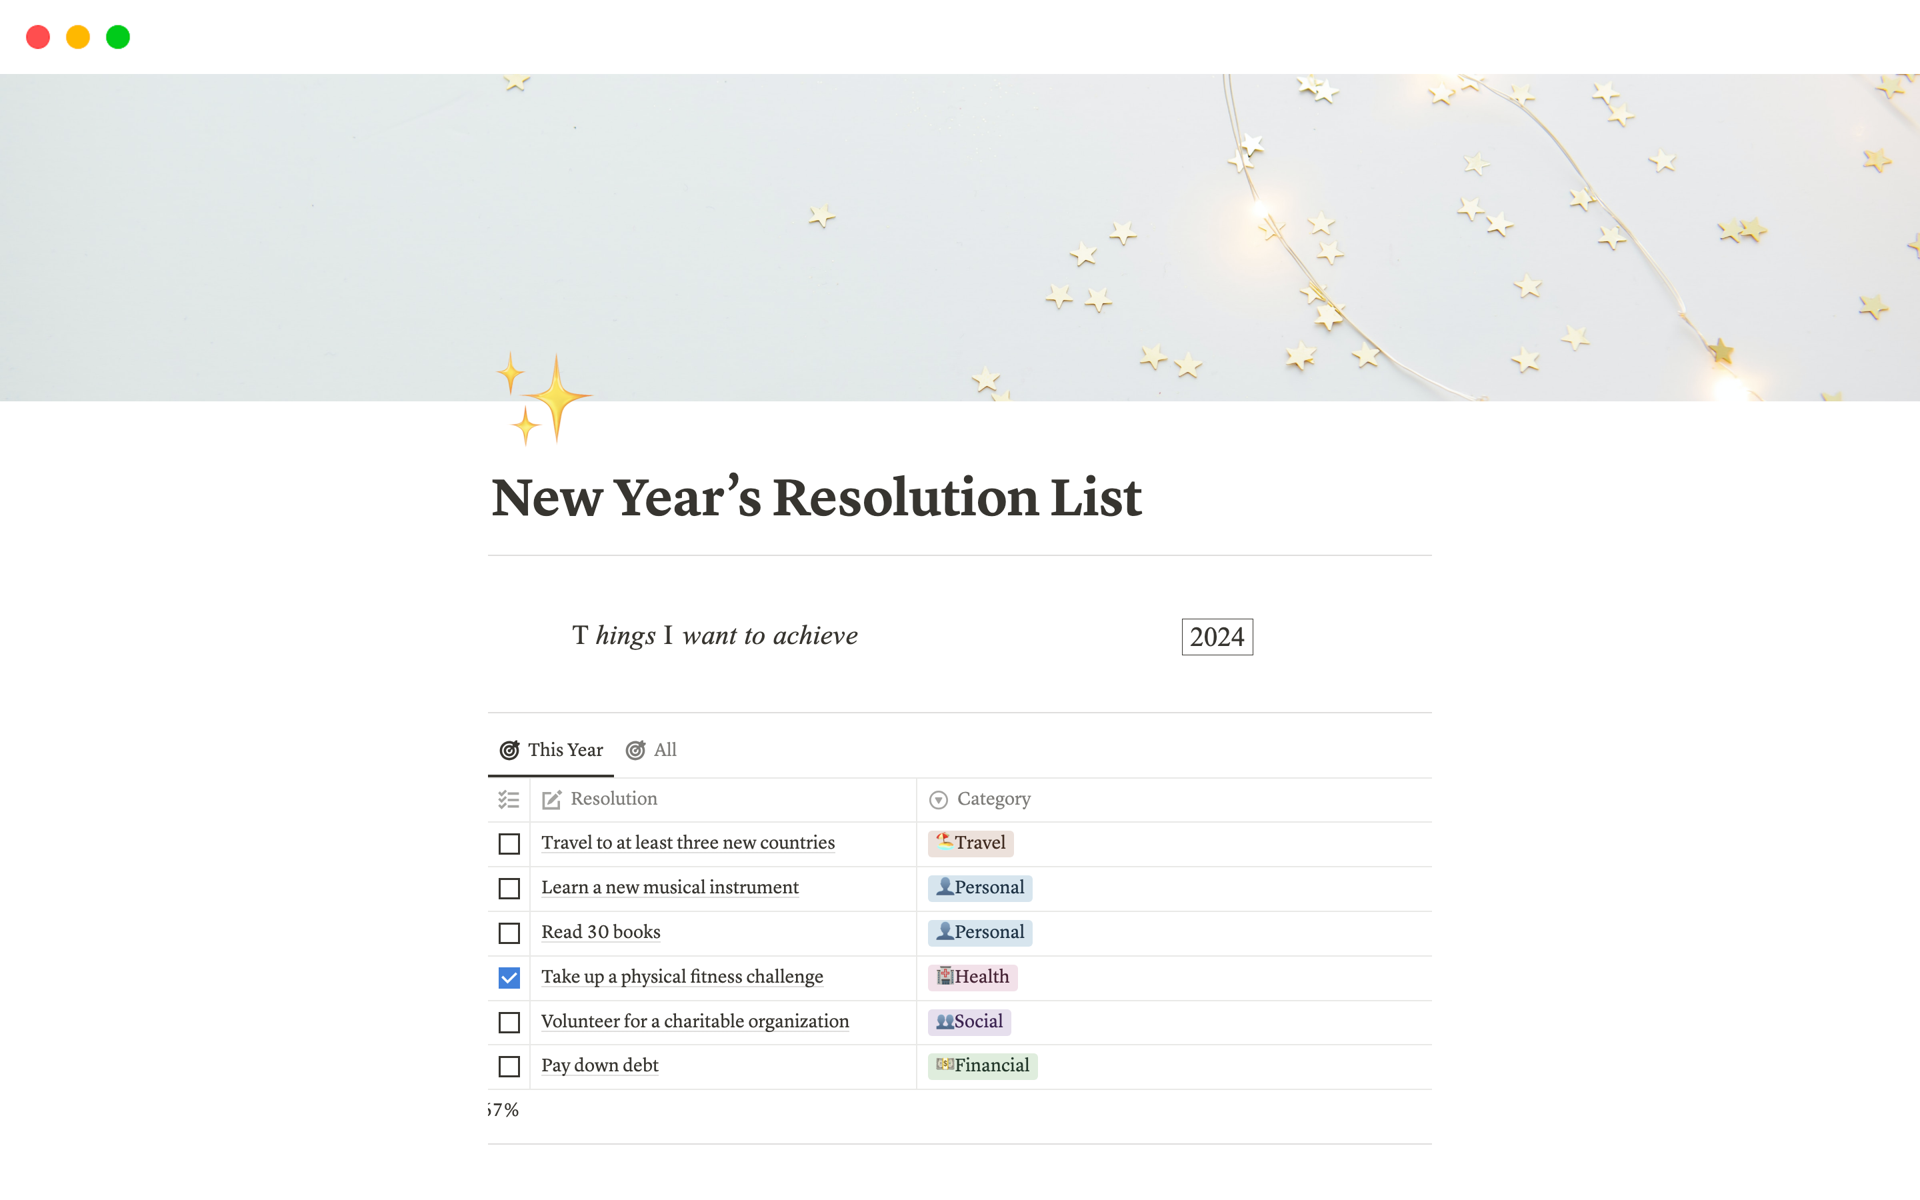 This template allows you to categorize your New Year's resolutions into various categories with a built-in progress tracker, making it easy to monitor the percentage of resolutions achieved throughout the year.